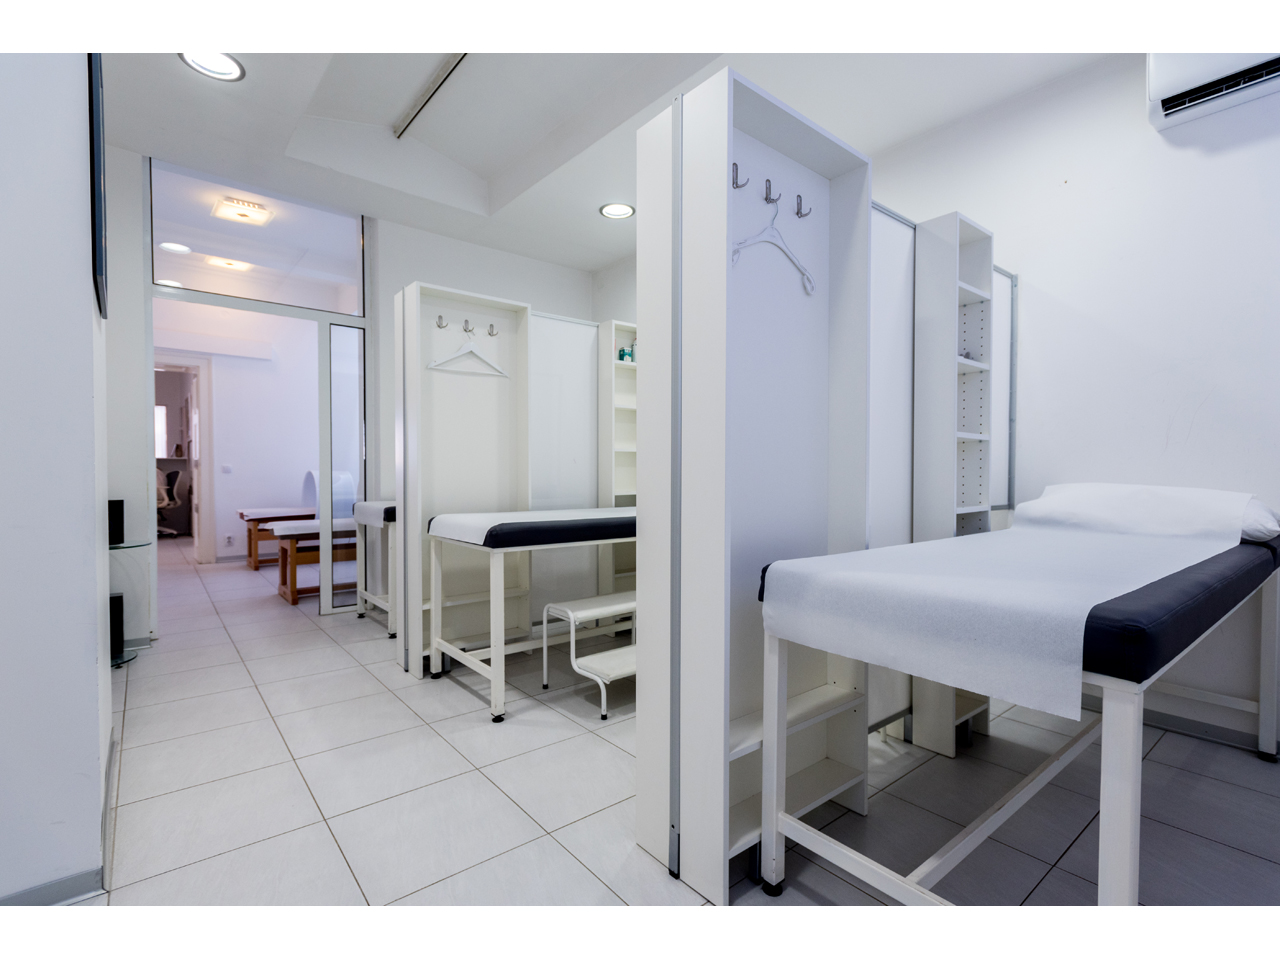 PAIN AND PHYSICAL THERAPY CENTER ANALGESIS Physical medicine Belgrade - Photo 6